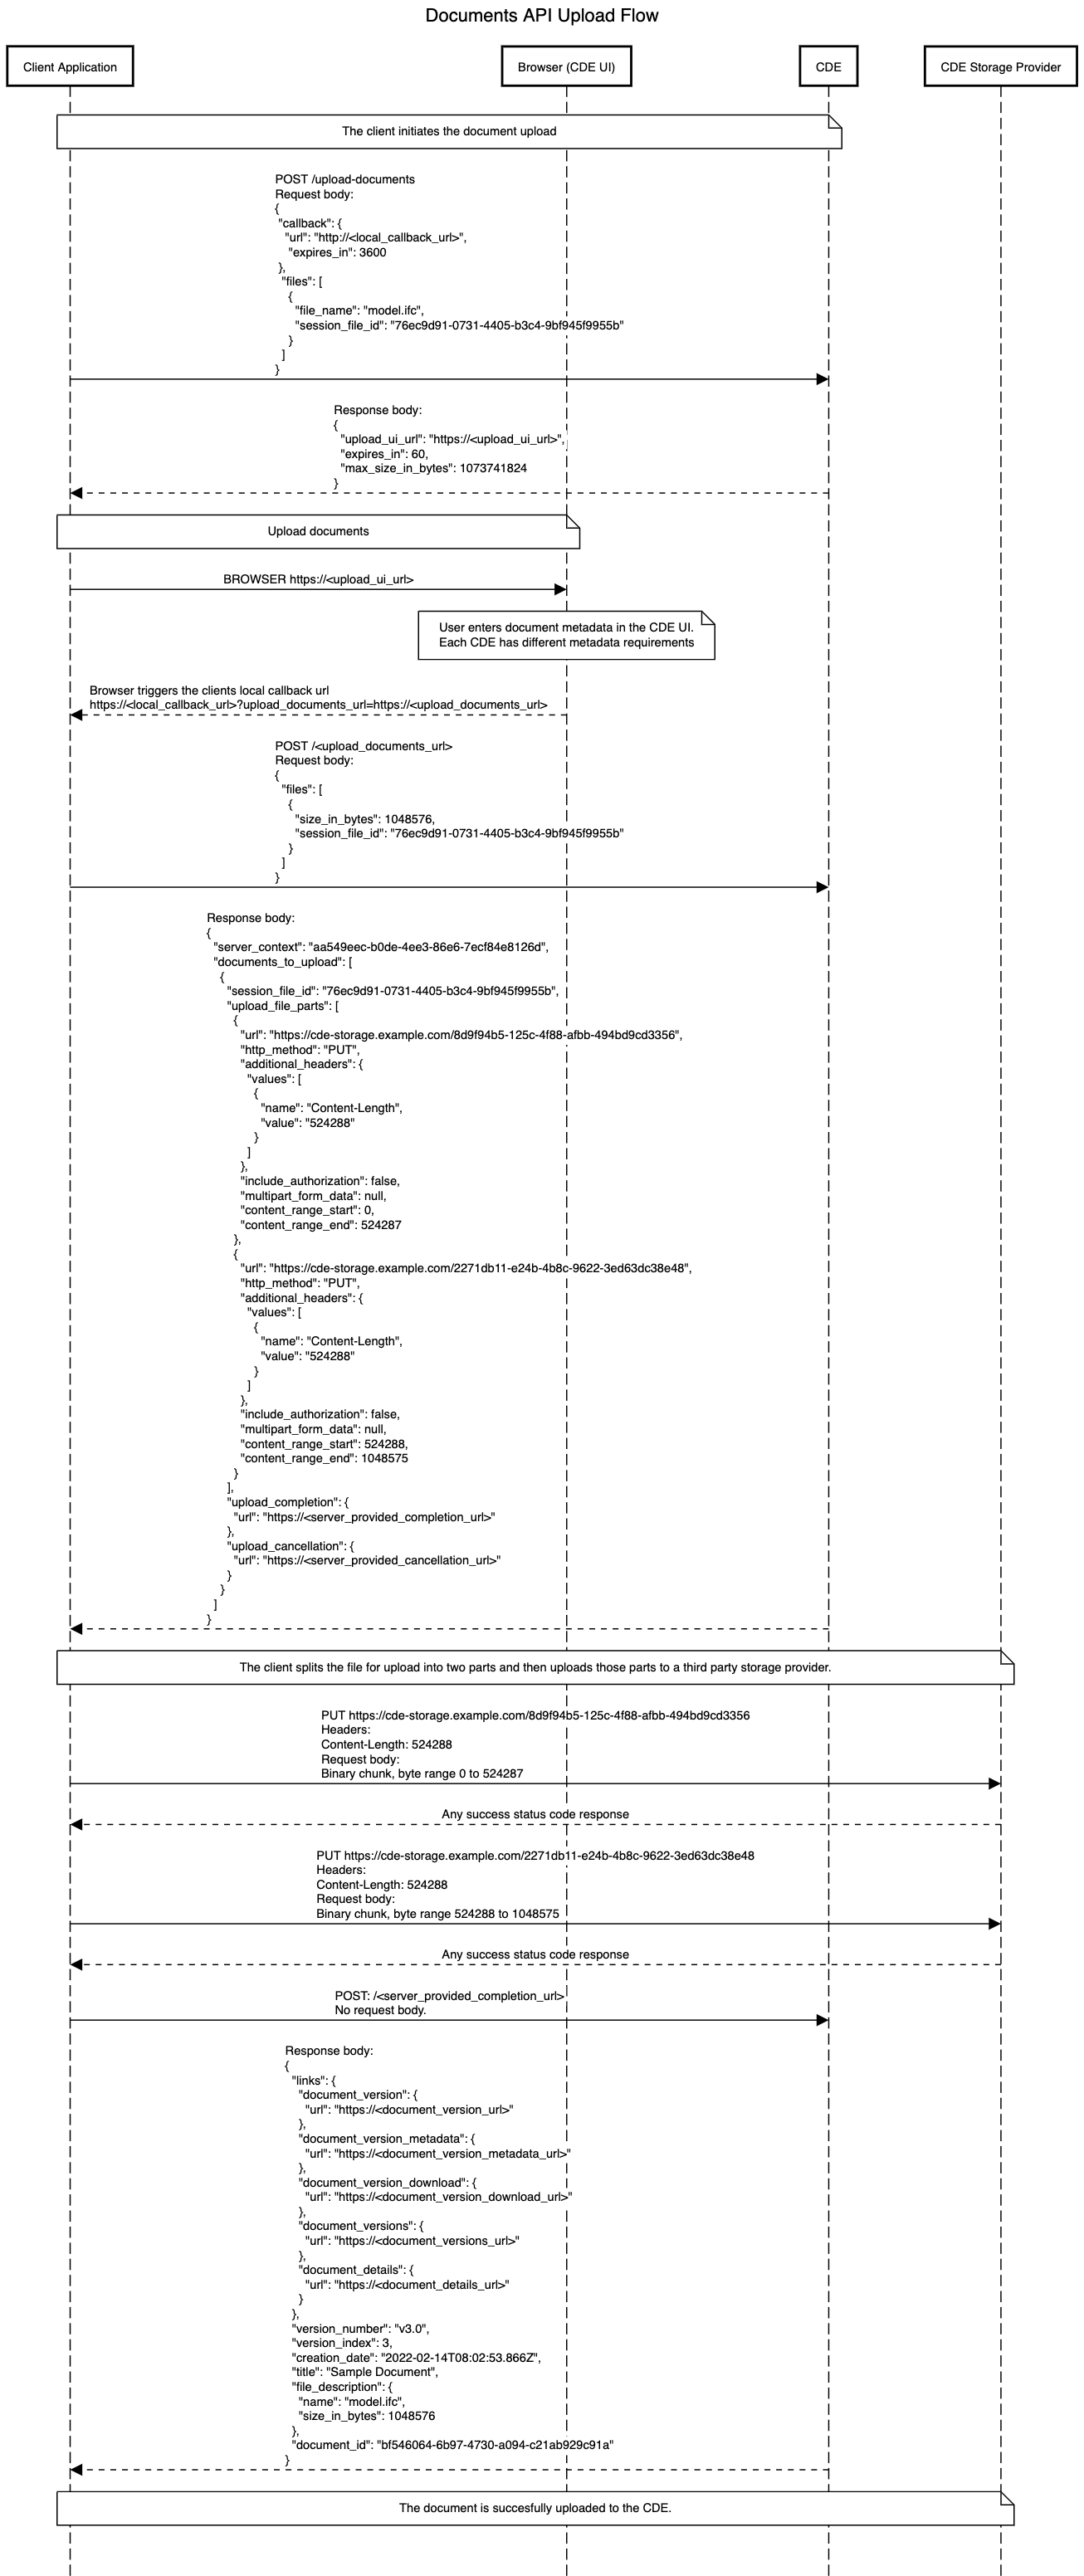 Document Upload Sequence Diagram